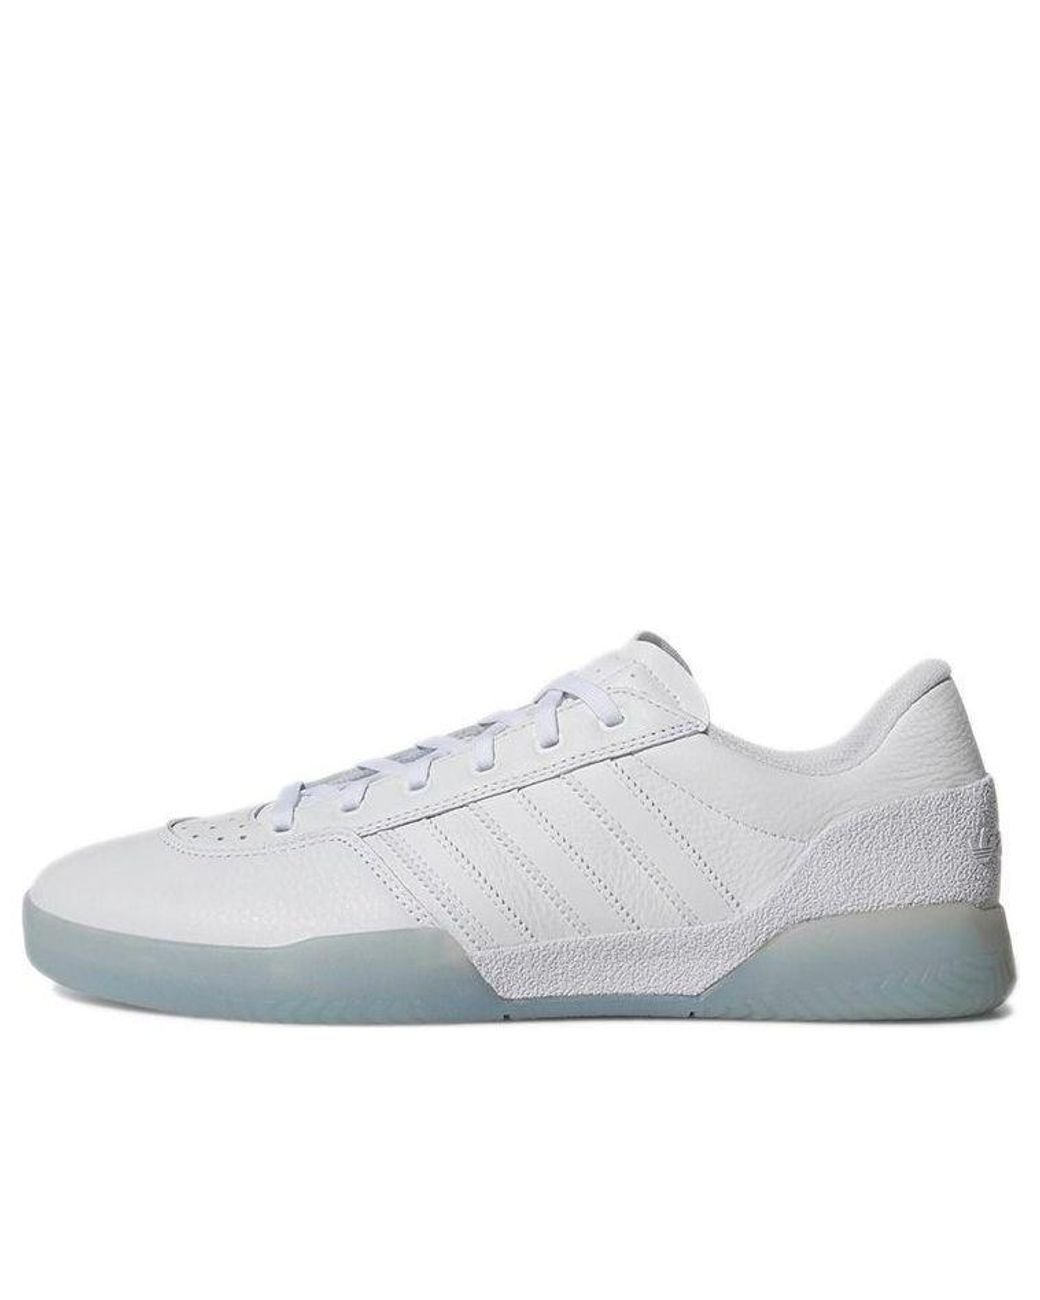 Helligdom At opdage Adskillelse adidas City Cup 'running White' for Men | Lyst